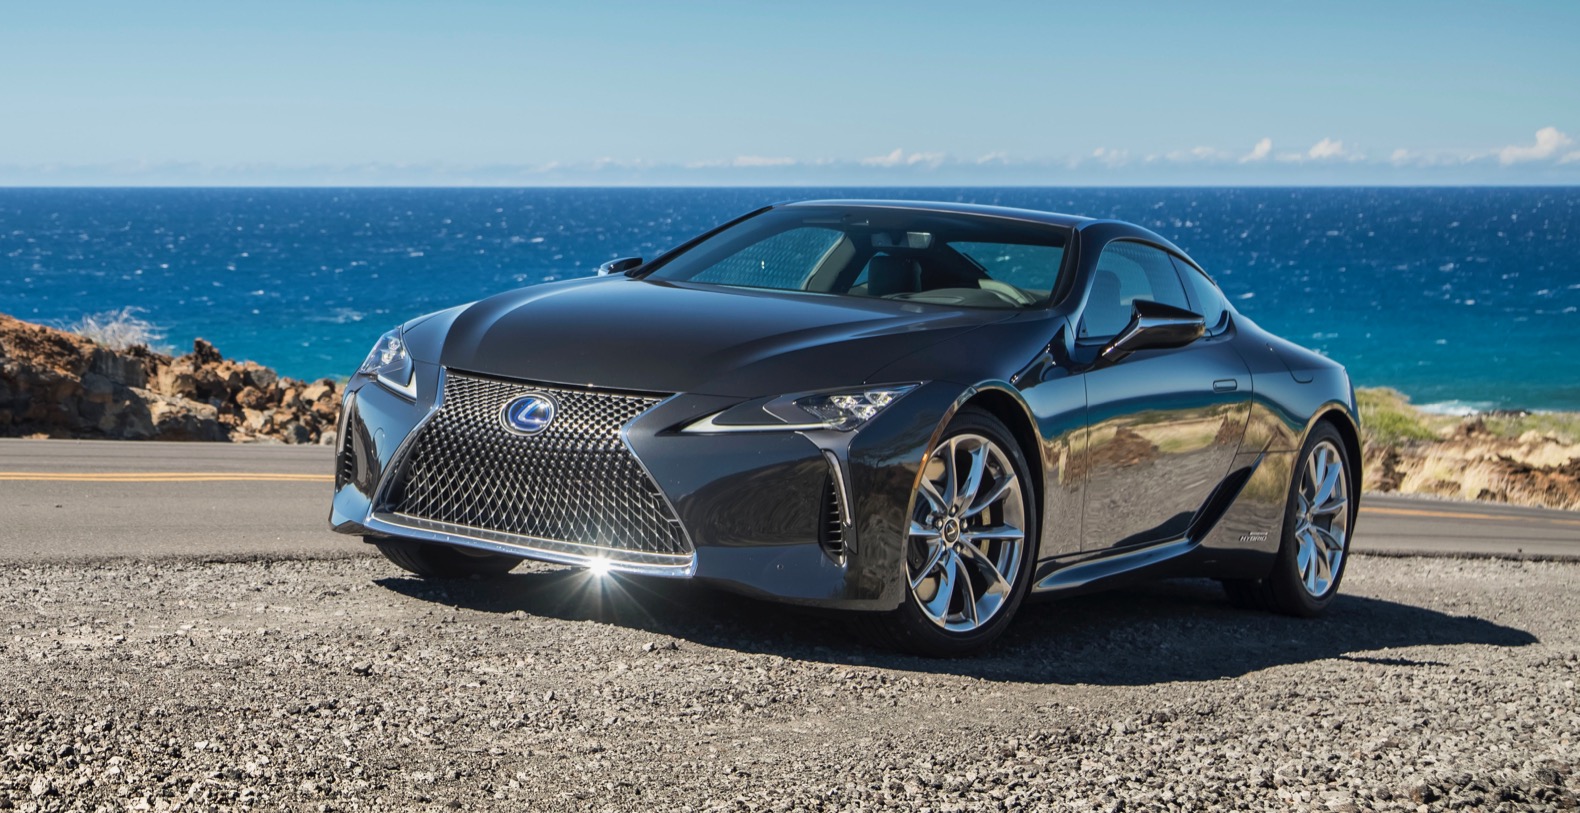 2020 Lexus LC 500h Review: A sporty and sexy hybrid - The Torque Report